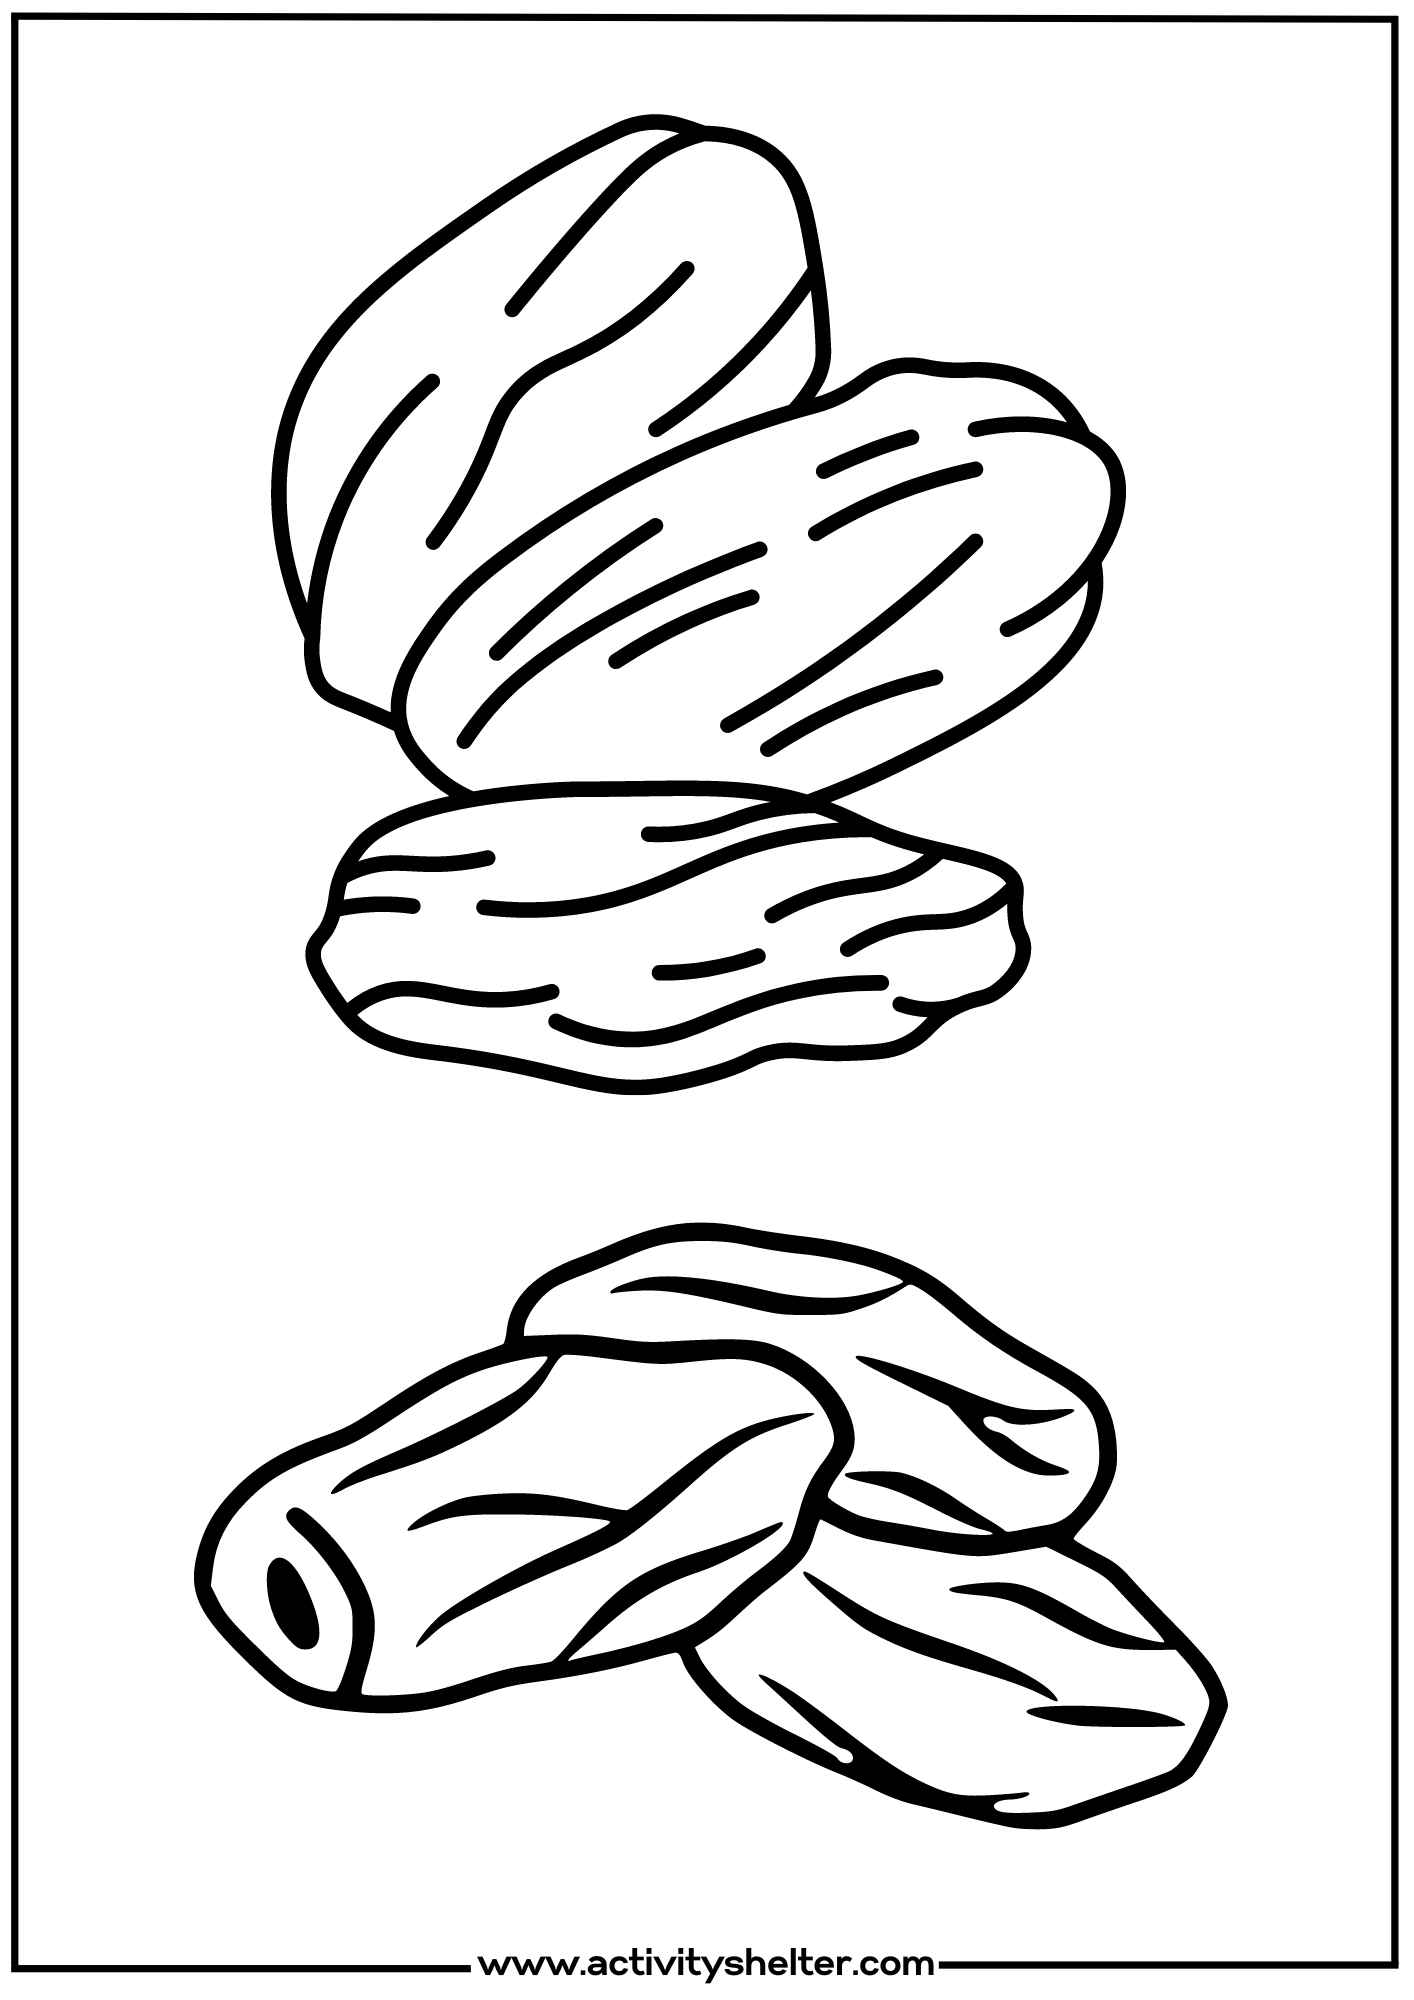 Coloring Pages for Ramadan